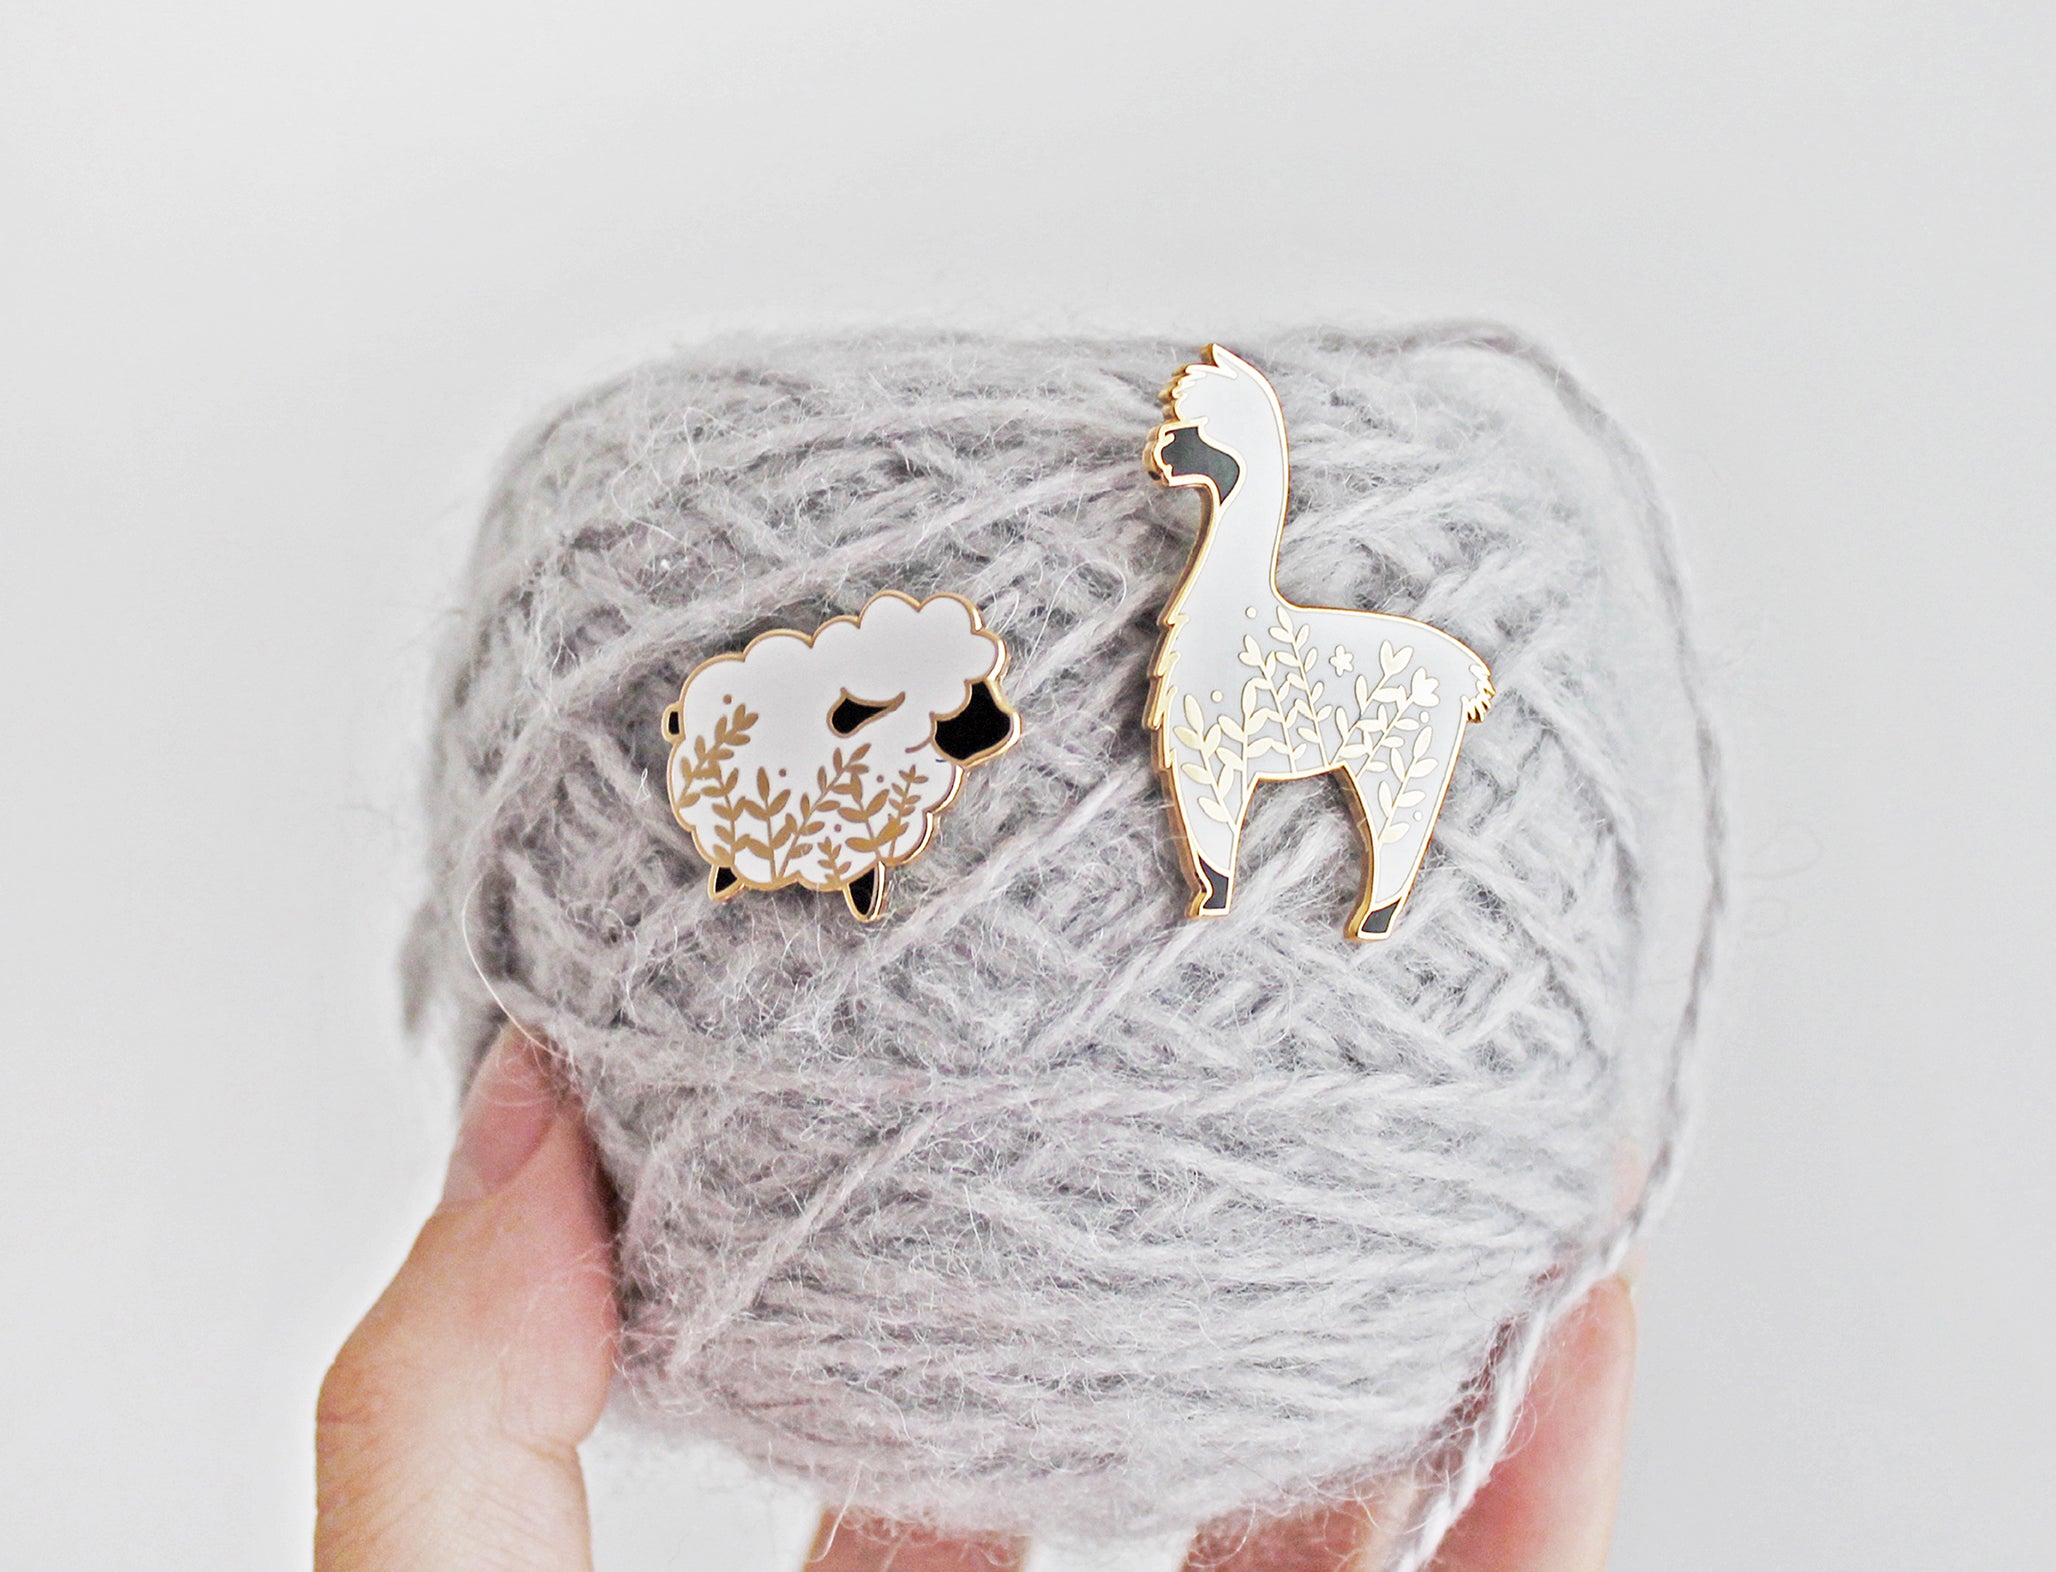 Cute alpaca enamel pin with a little floral whimsy. A beautiful pin made for animal lovers, fiber enthusiasts, knitters and crocheters.